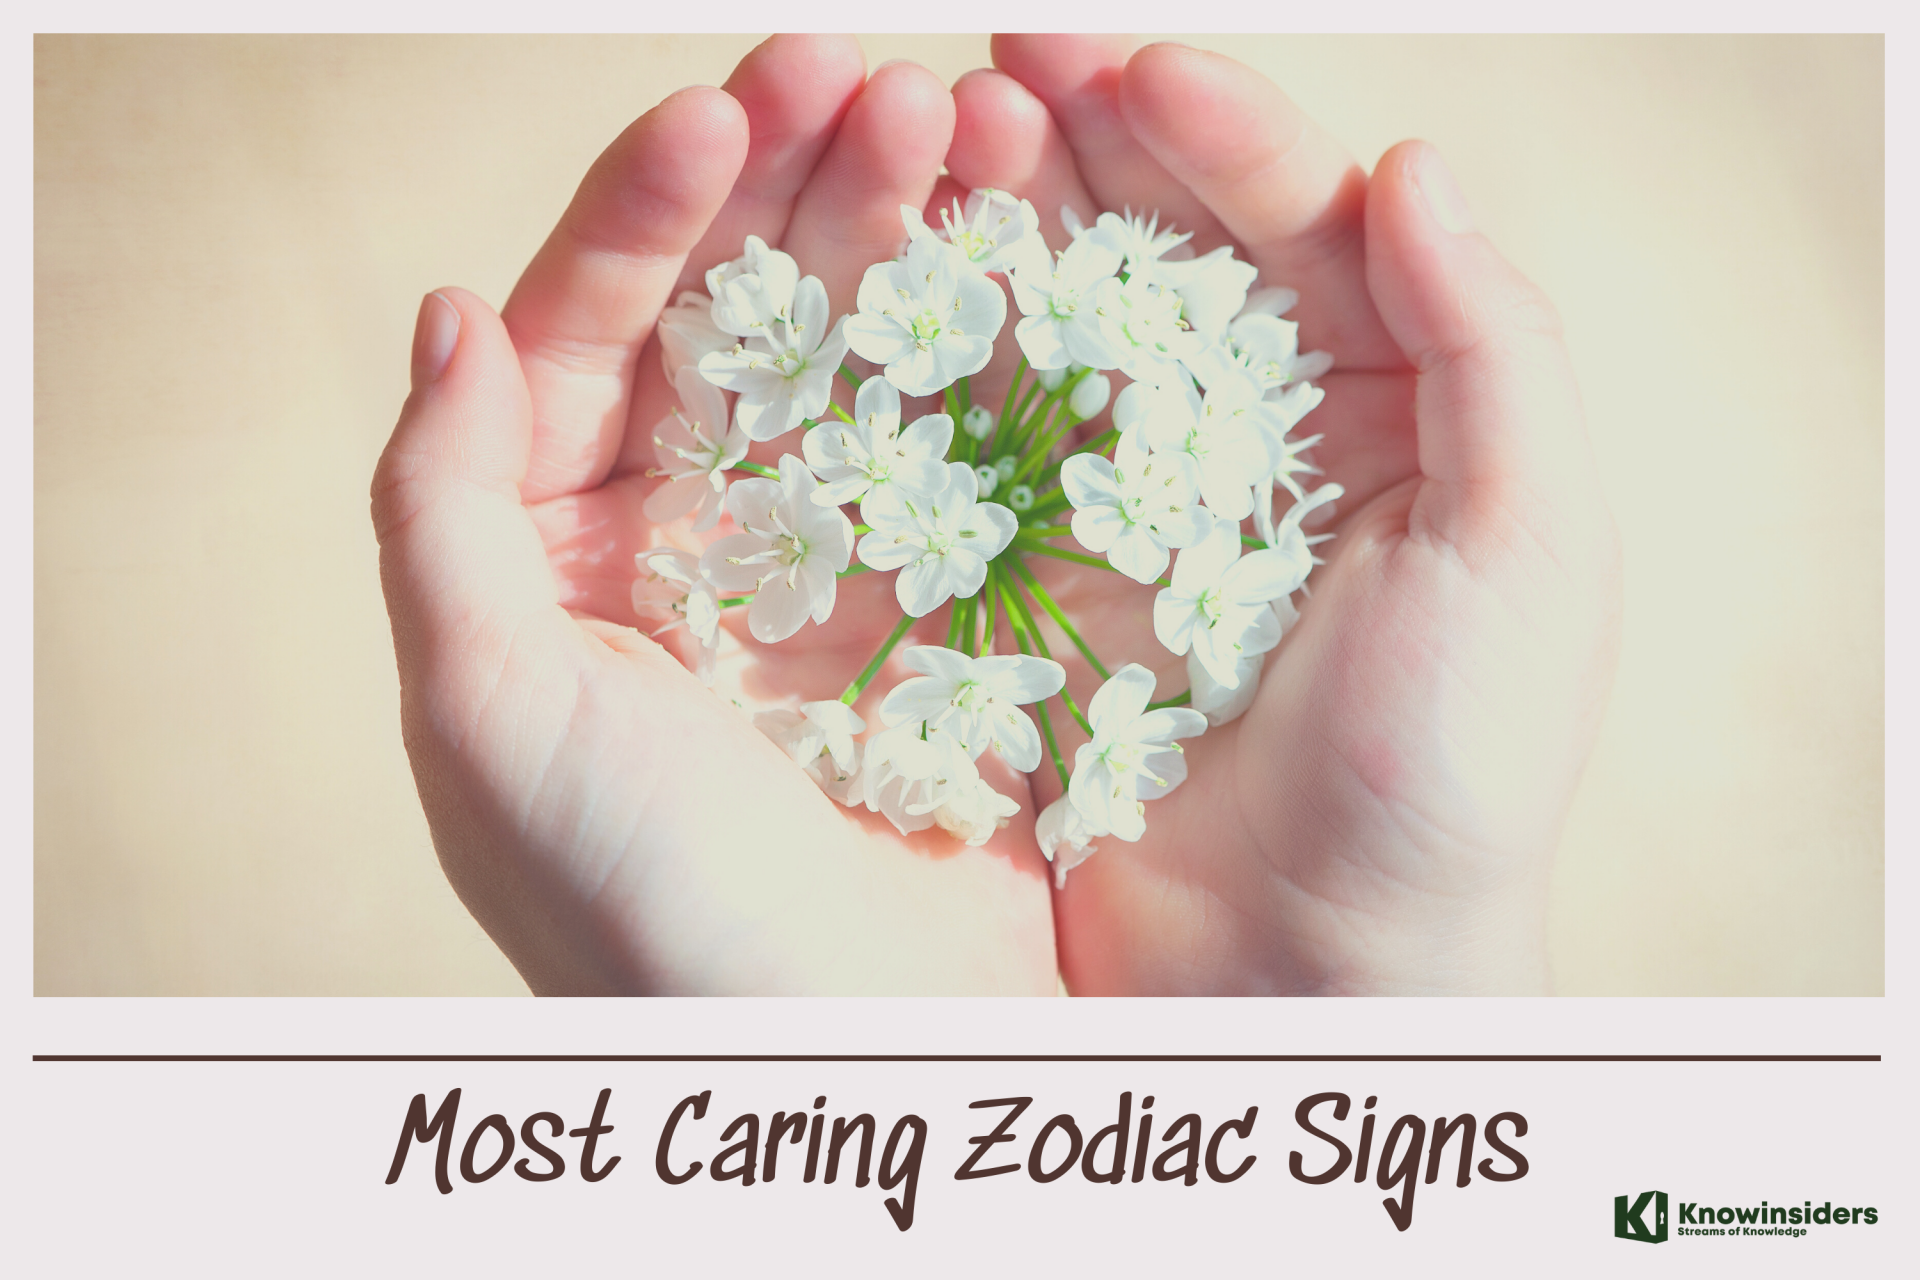 Top 5 Most Caring Zodiac Signs Who Show Warm-Heartedness in Different Ways